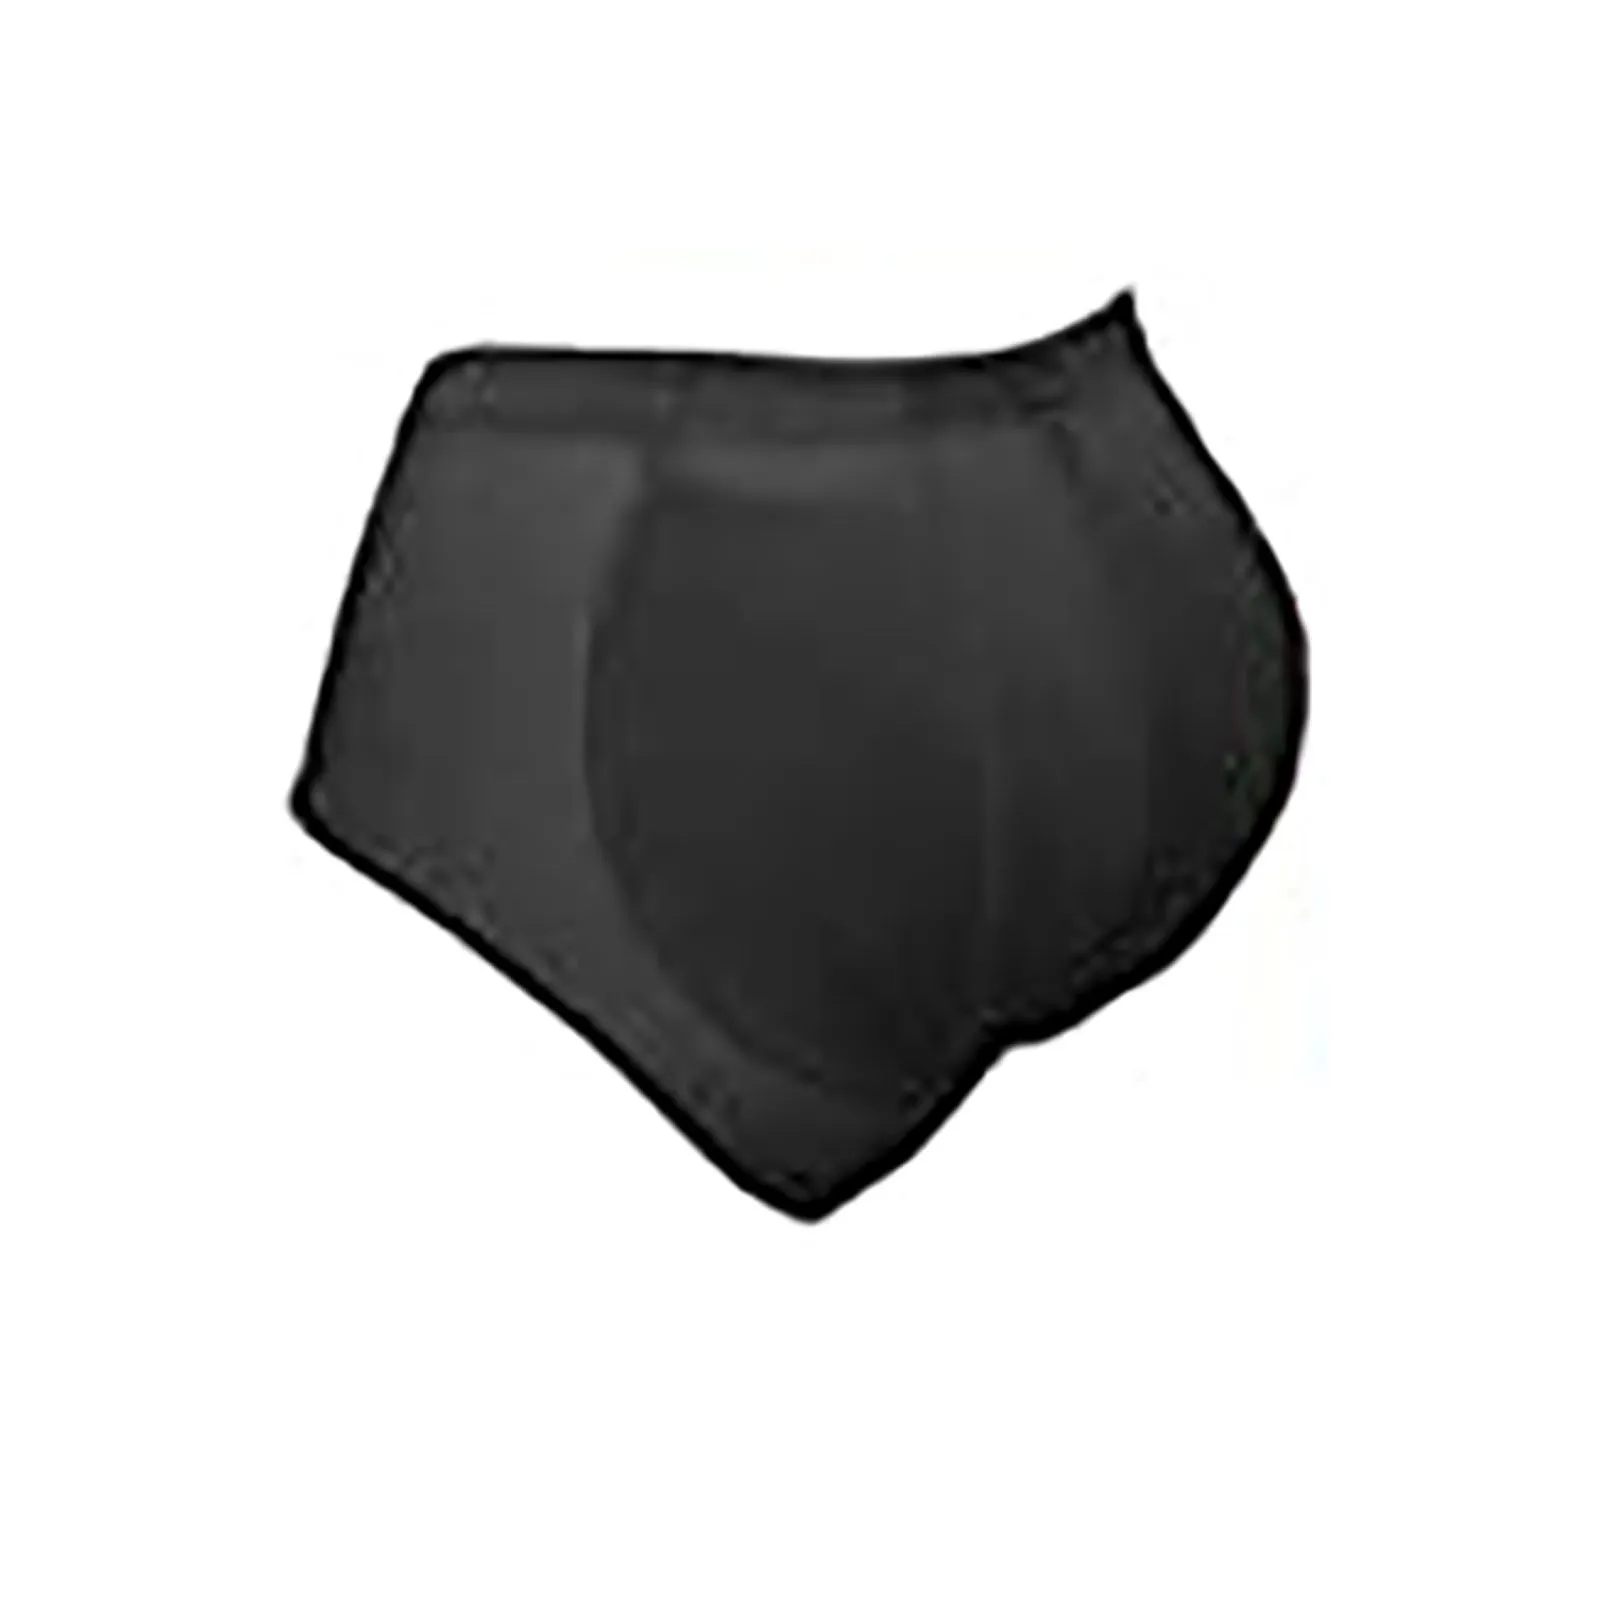 Butt padded panties Silicone Pads buttock Enhancer body Shaper Brief Panty